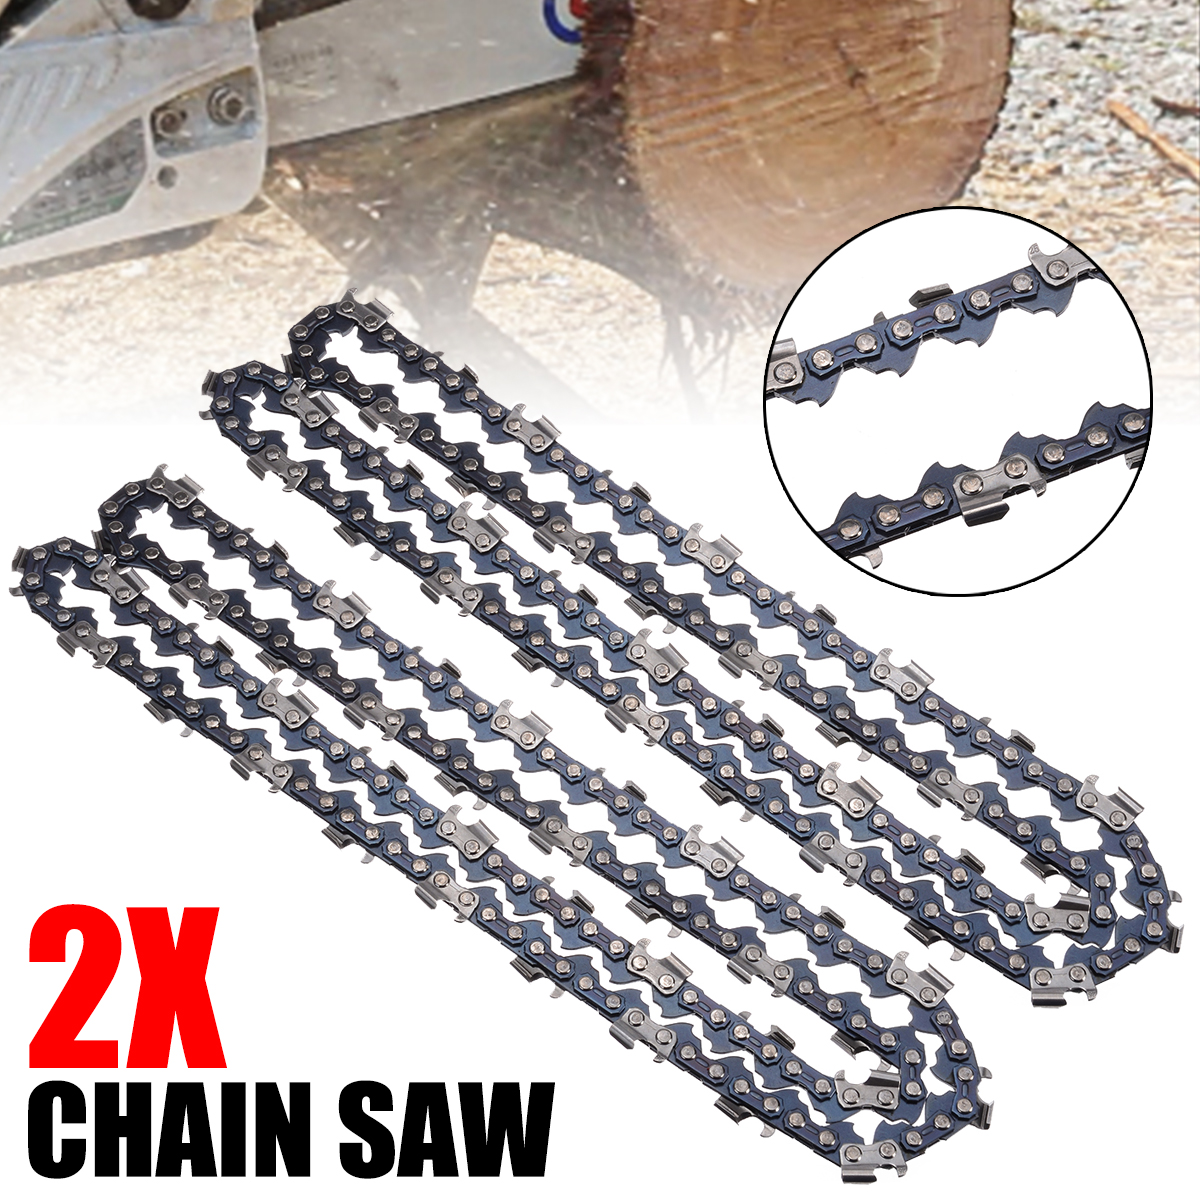 

High Quality 20 Inch Chainsaw Chain Bar Pitch Blade Wood Cutting 76 Drive Links Chainsaw Spares Home Improvement